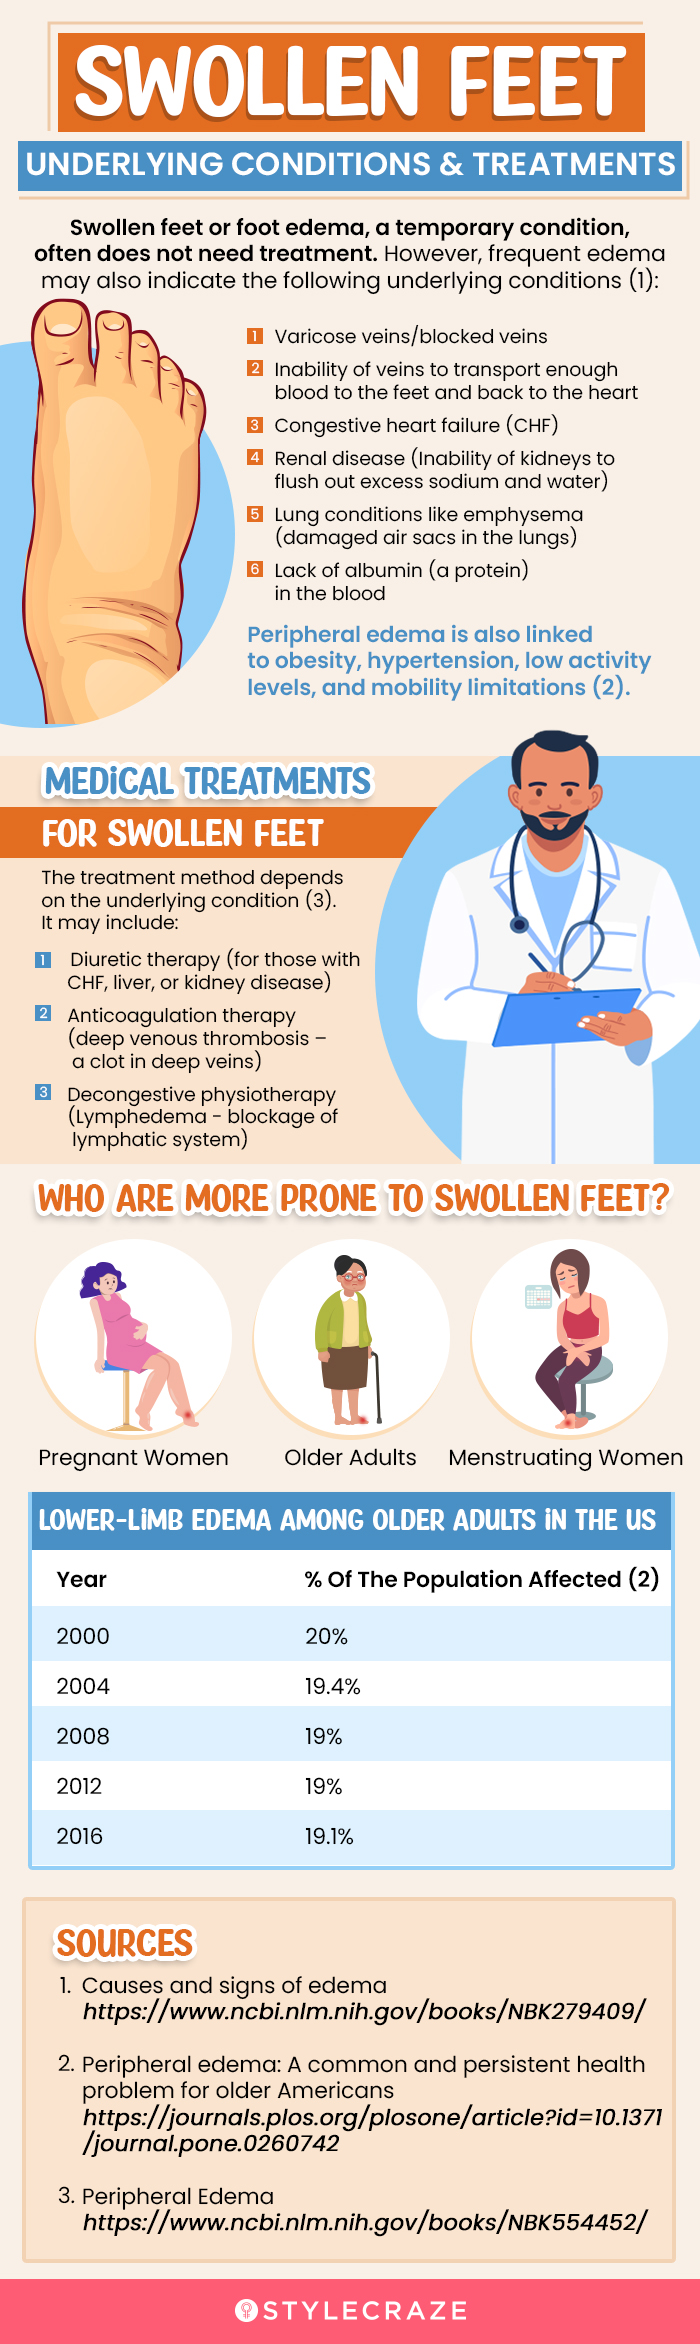 facts about swollen feet [infographic]